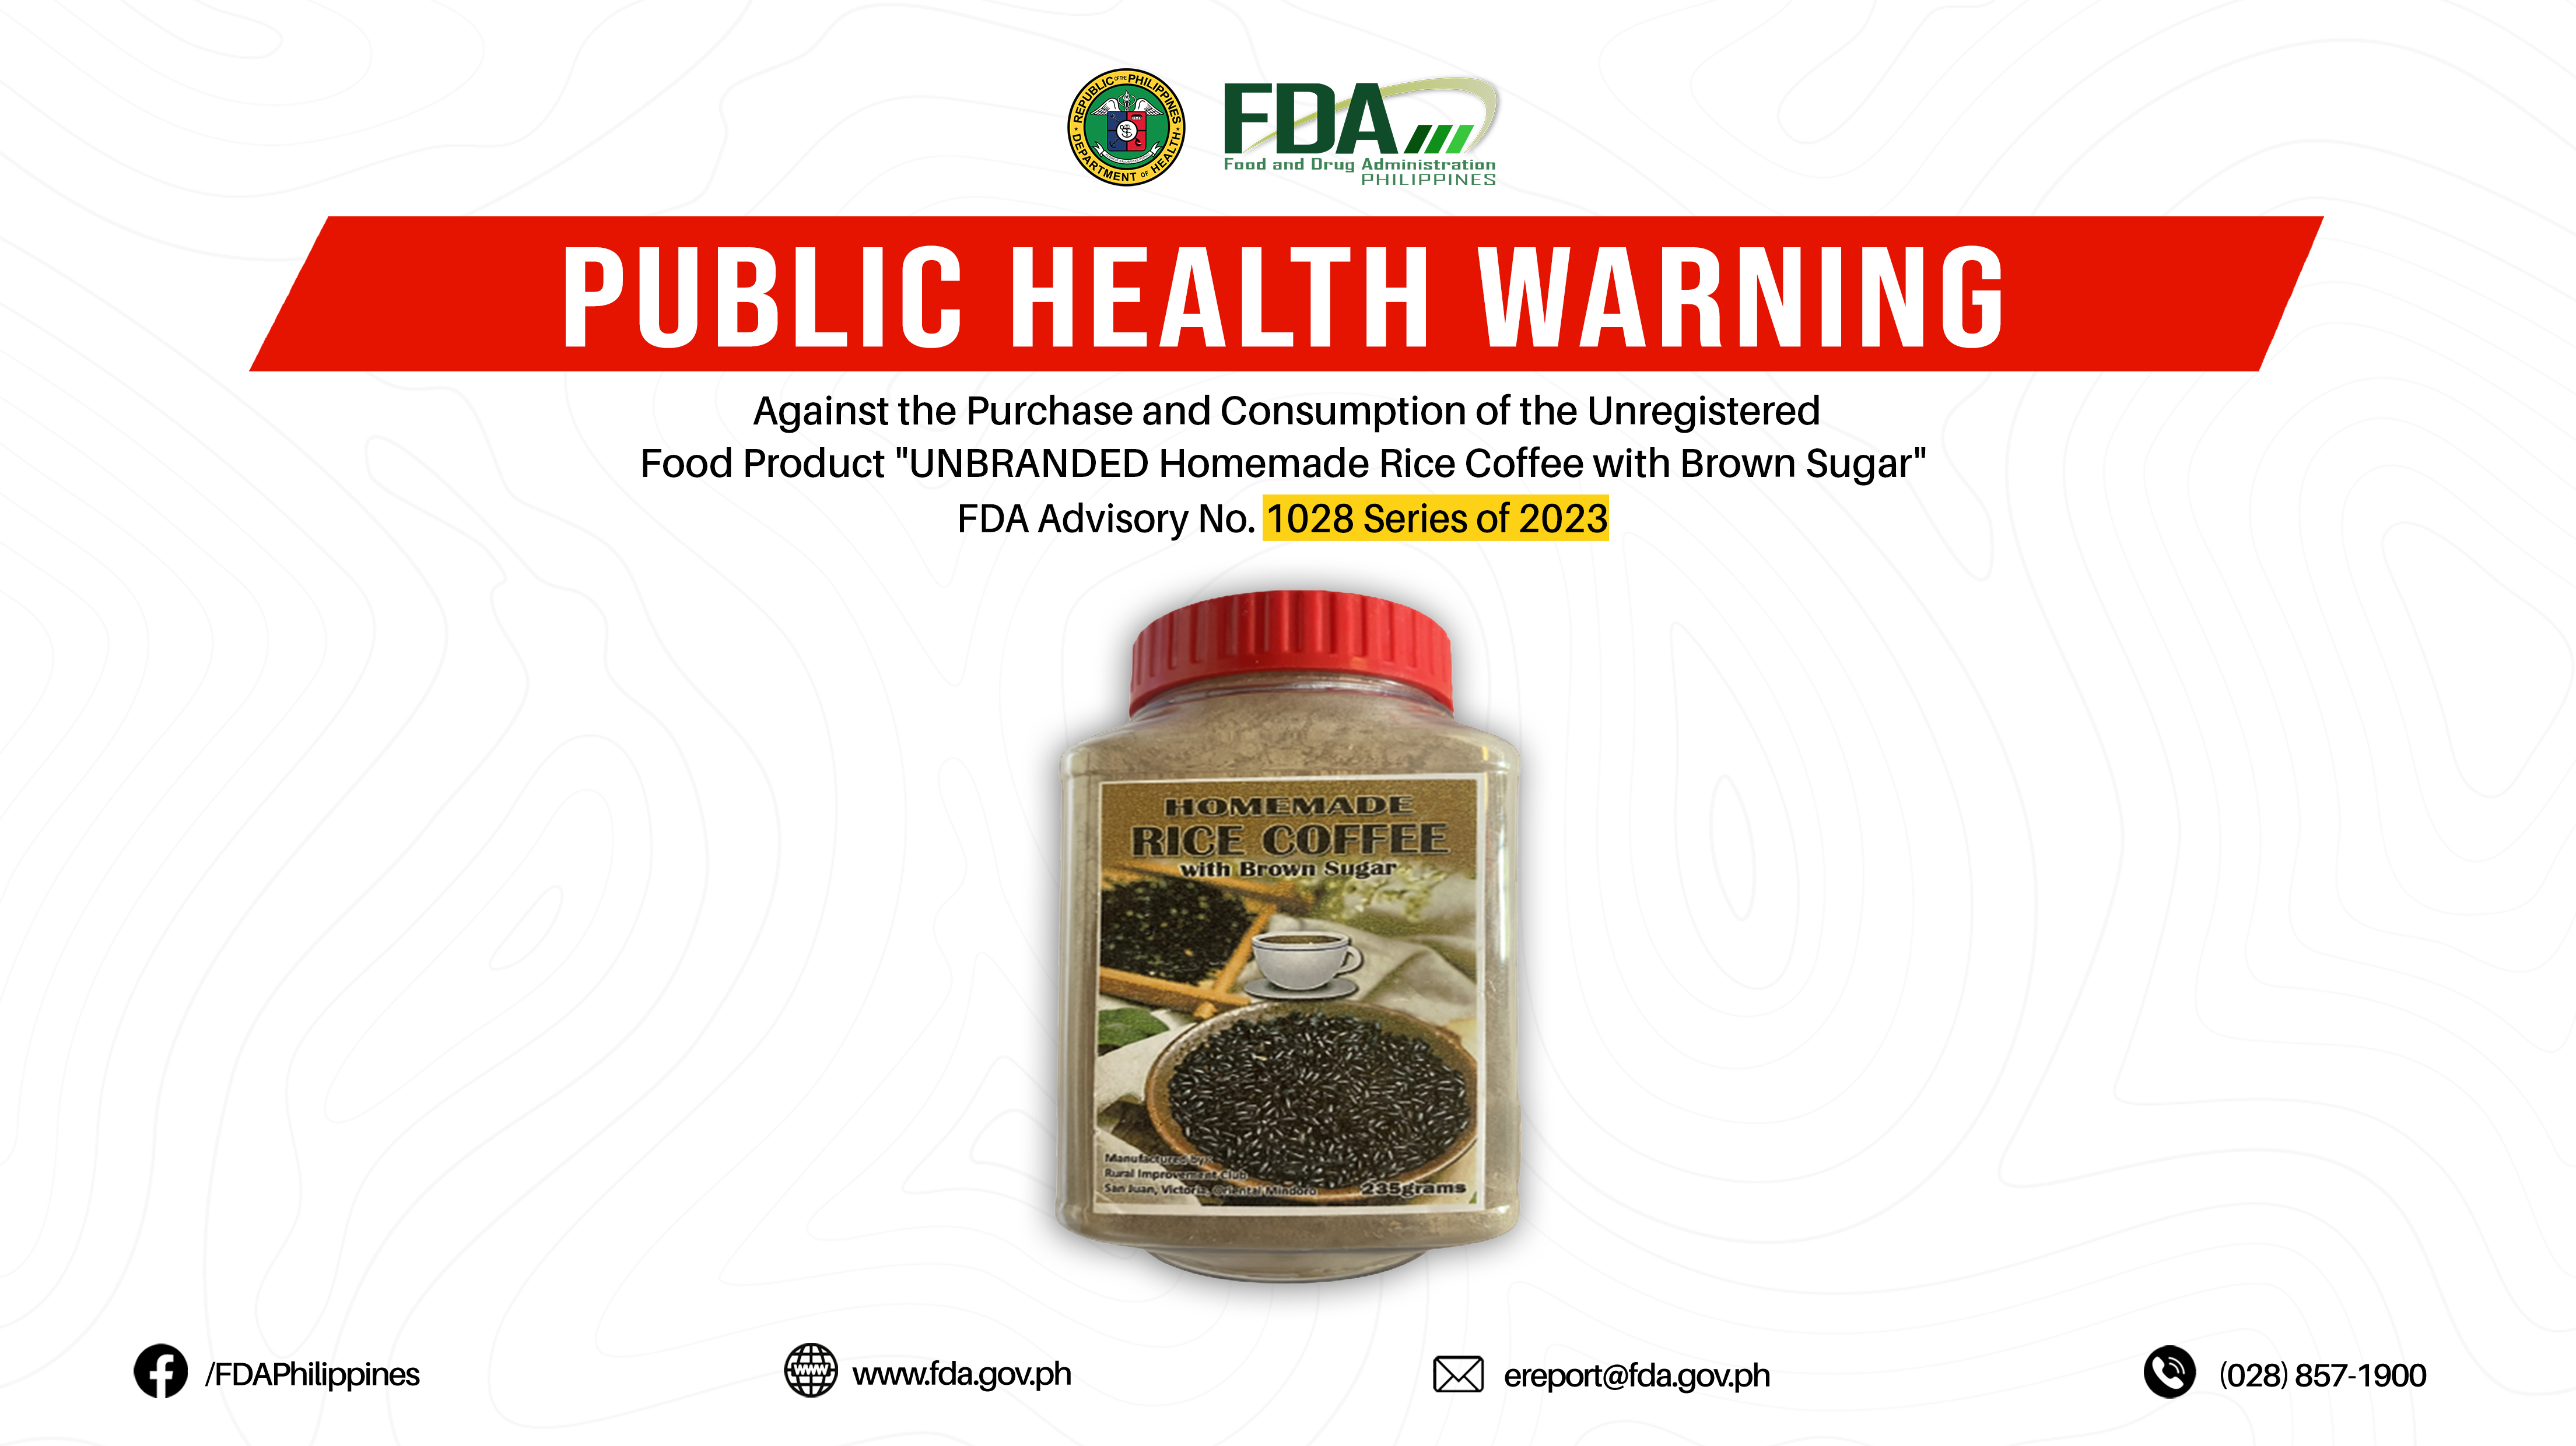 FDA Advisory No.2023-1028 || Public Health Warning Against the Purchase and Consumption of the Unregistered Food Product “UNBRANDED Homemade Rice Coffee with Brown Sugar”